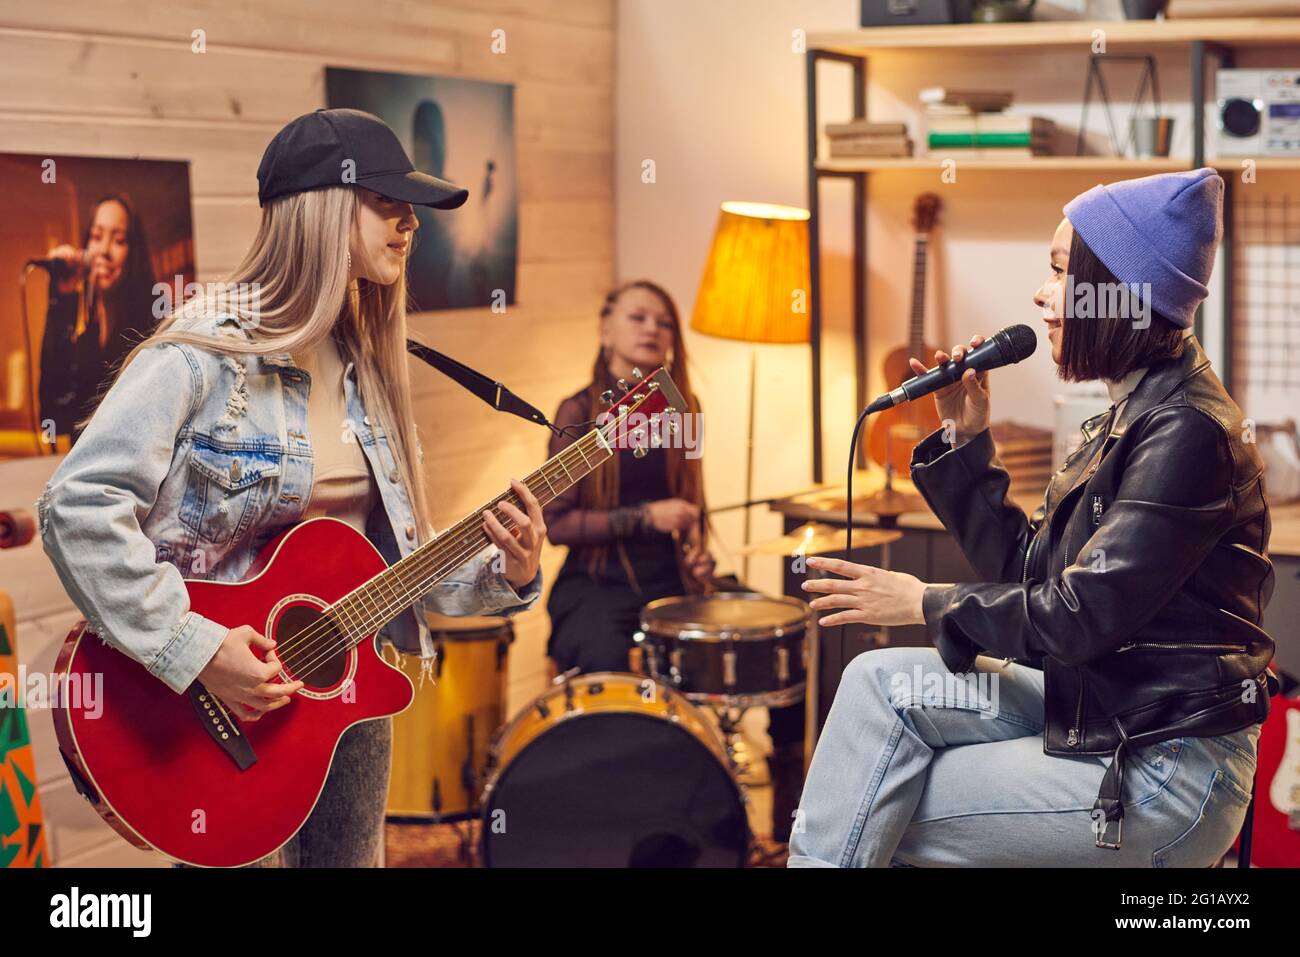 Girl with microphone singing among her friends with musical instruments Stock Photo